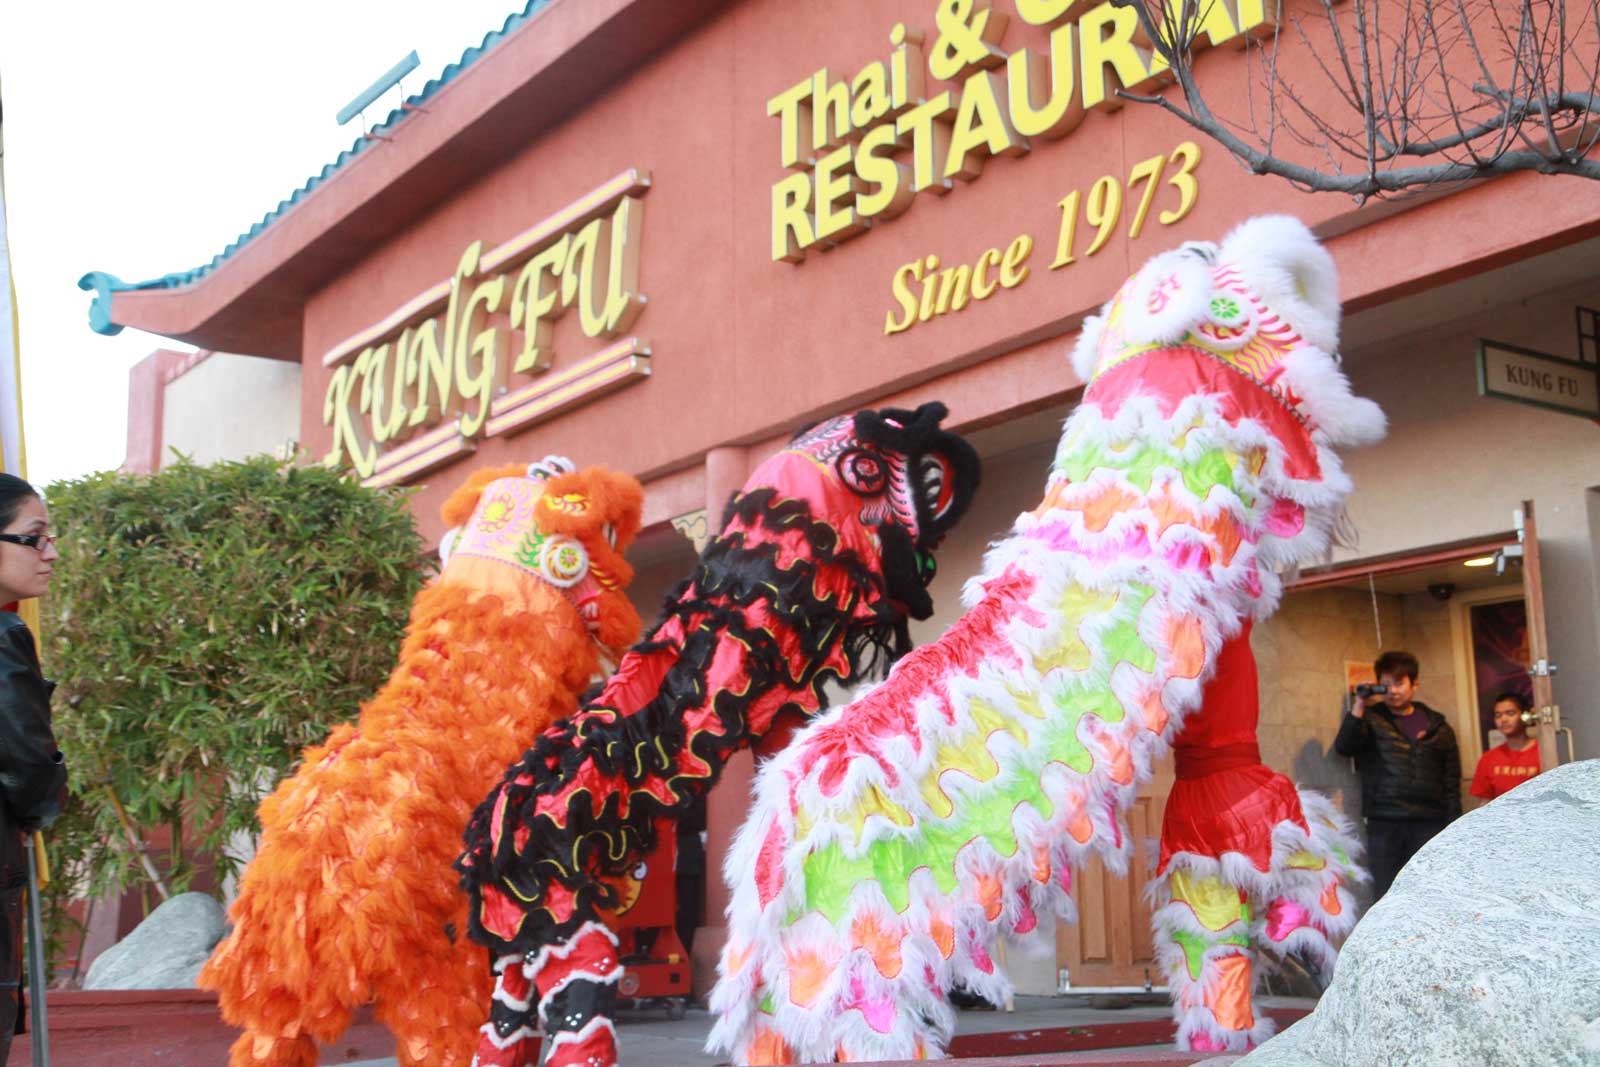 Chinese New Year in Las Vegas - Chinatown Restaurant Kung Fu Welcomes Year of the Horse With ...